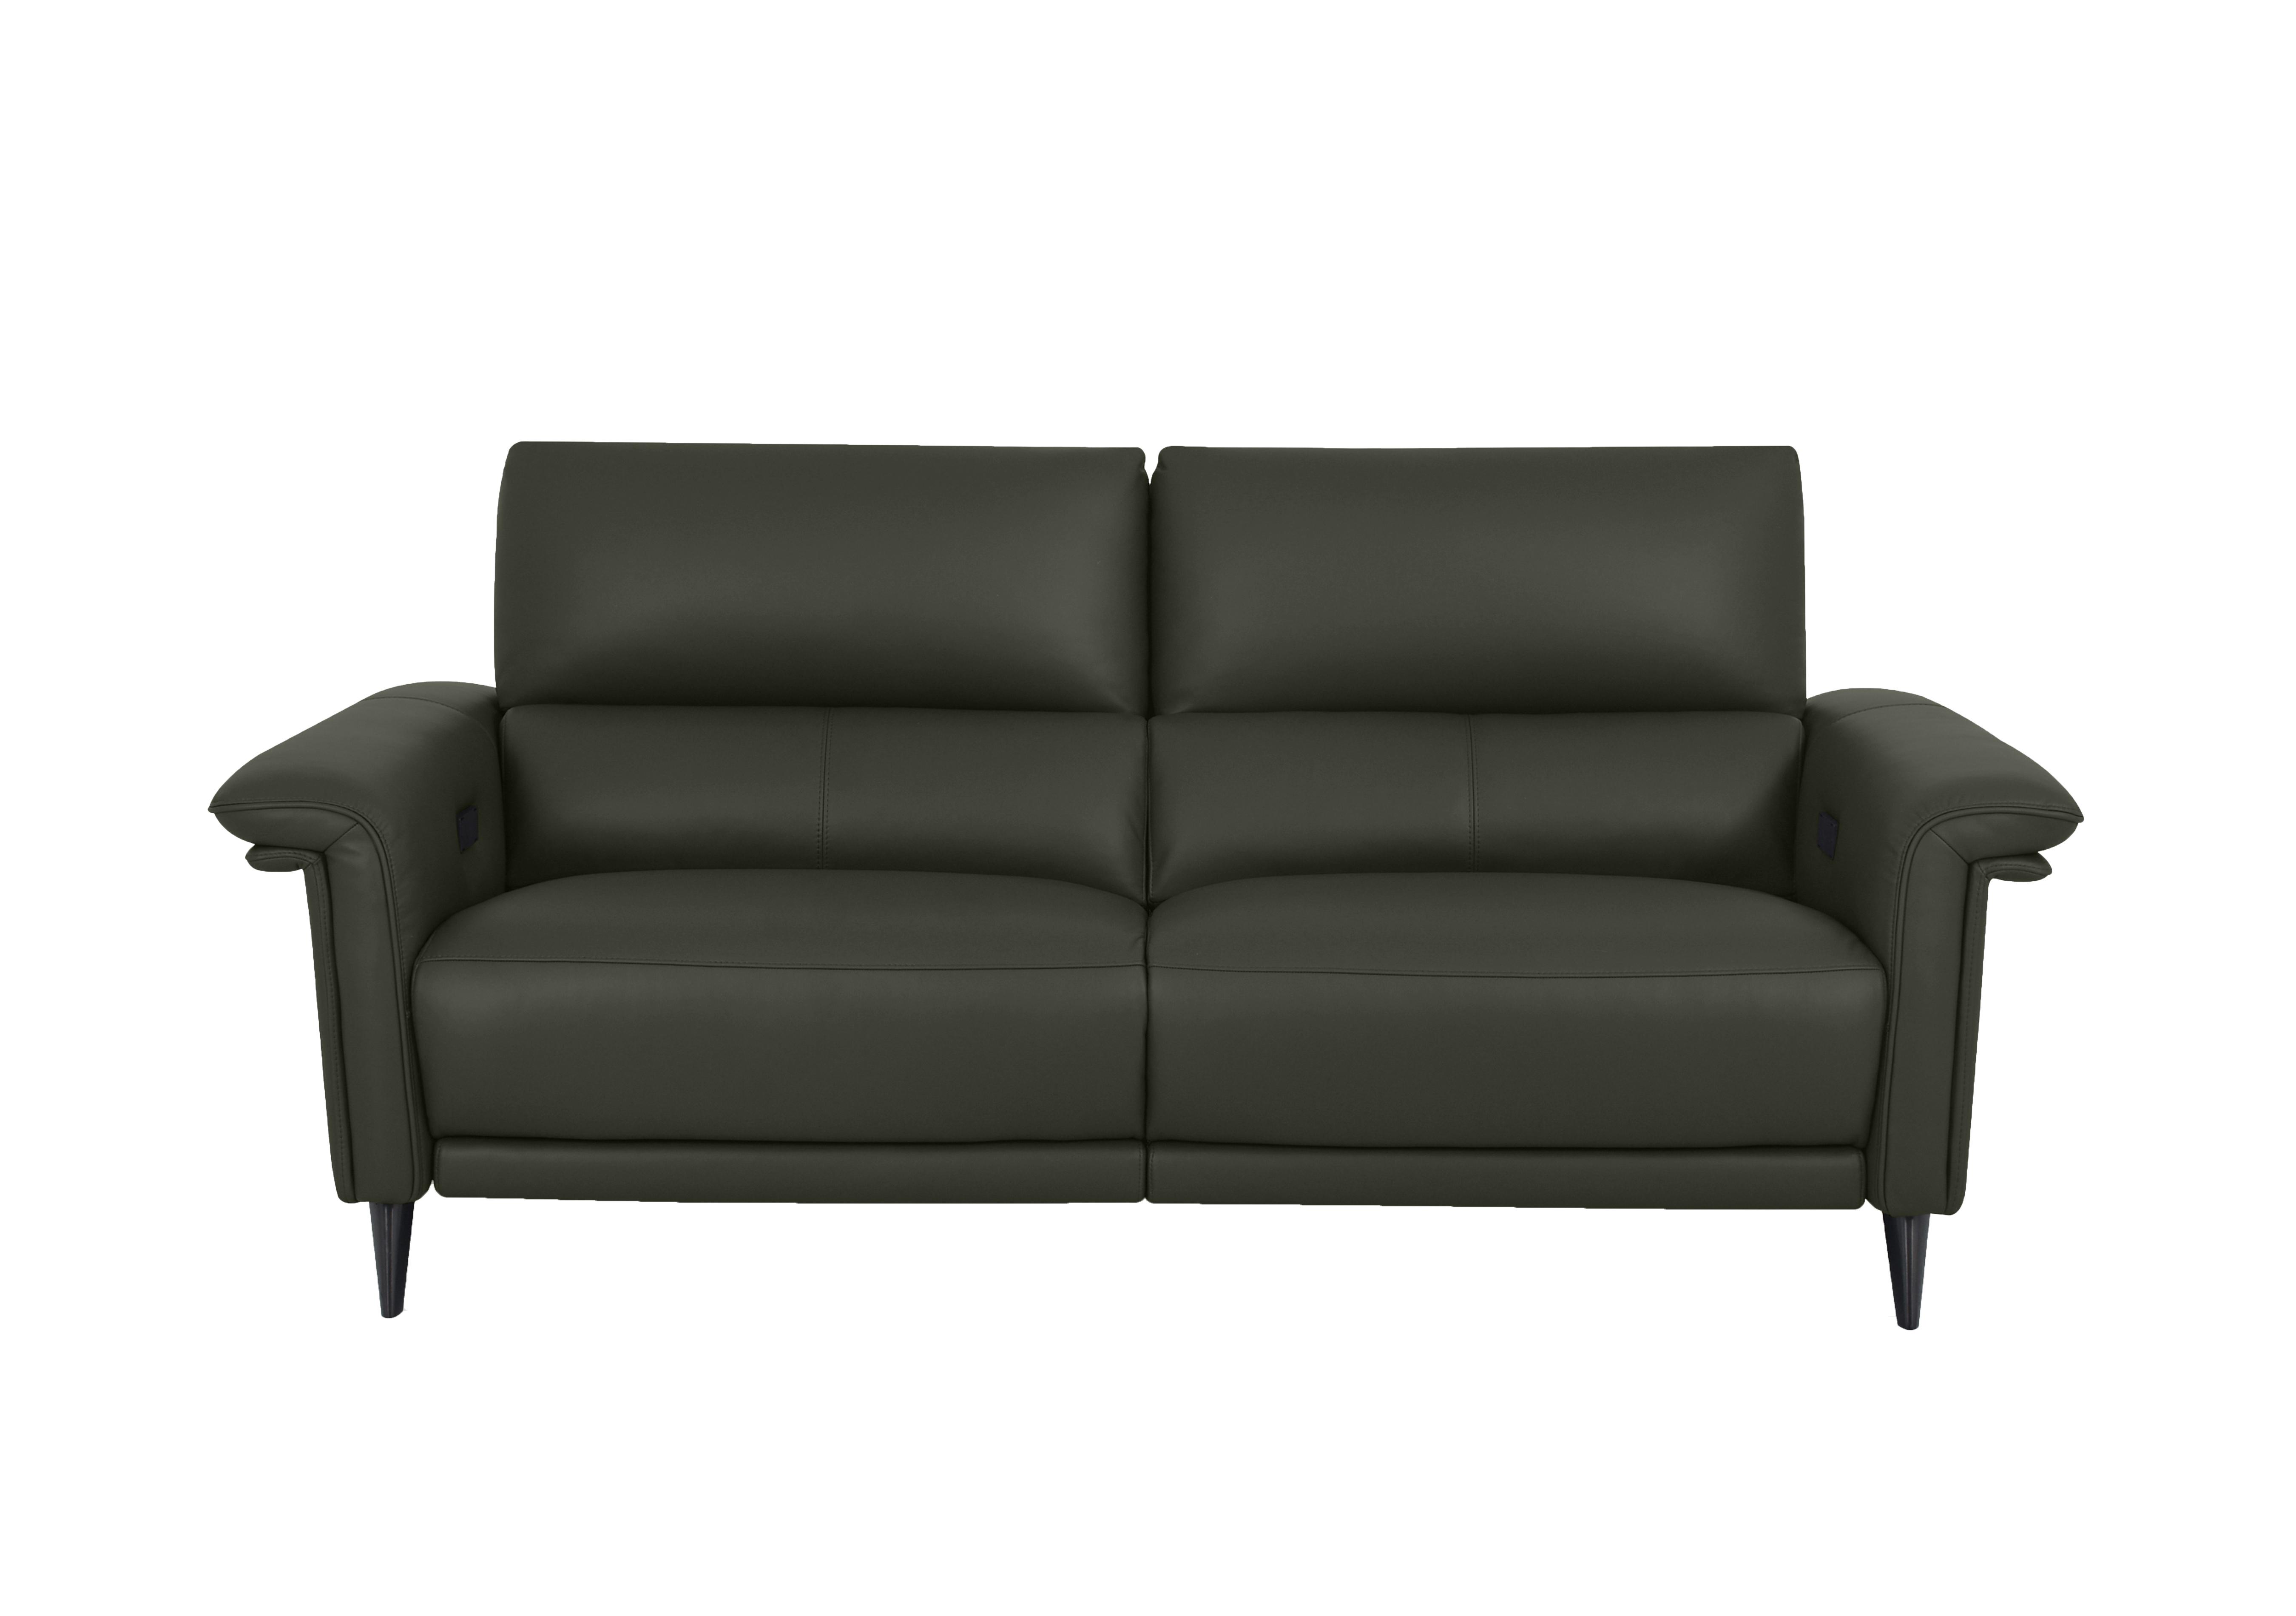 Huxley 3 Seater Leather Sofa in Nn-570e Olive Green on Furniture Village